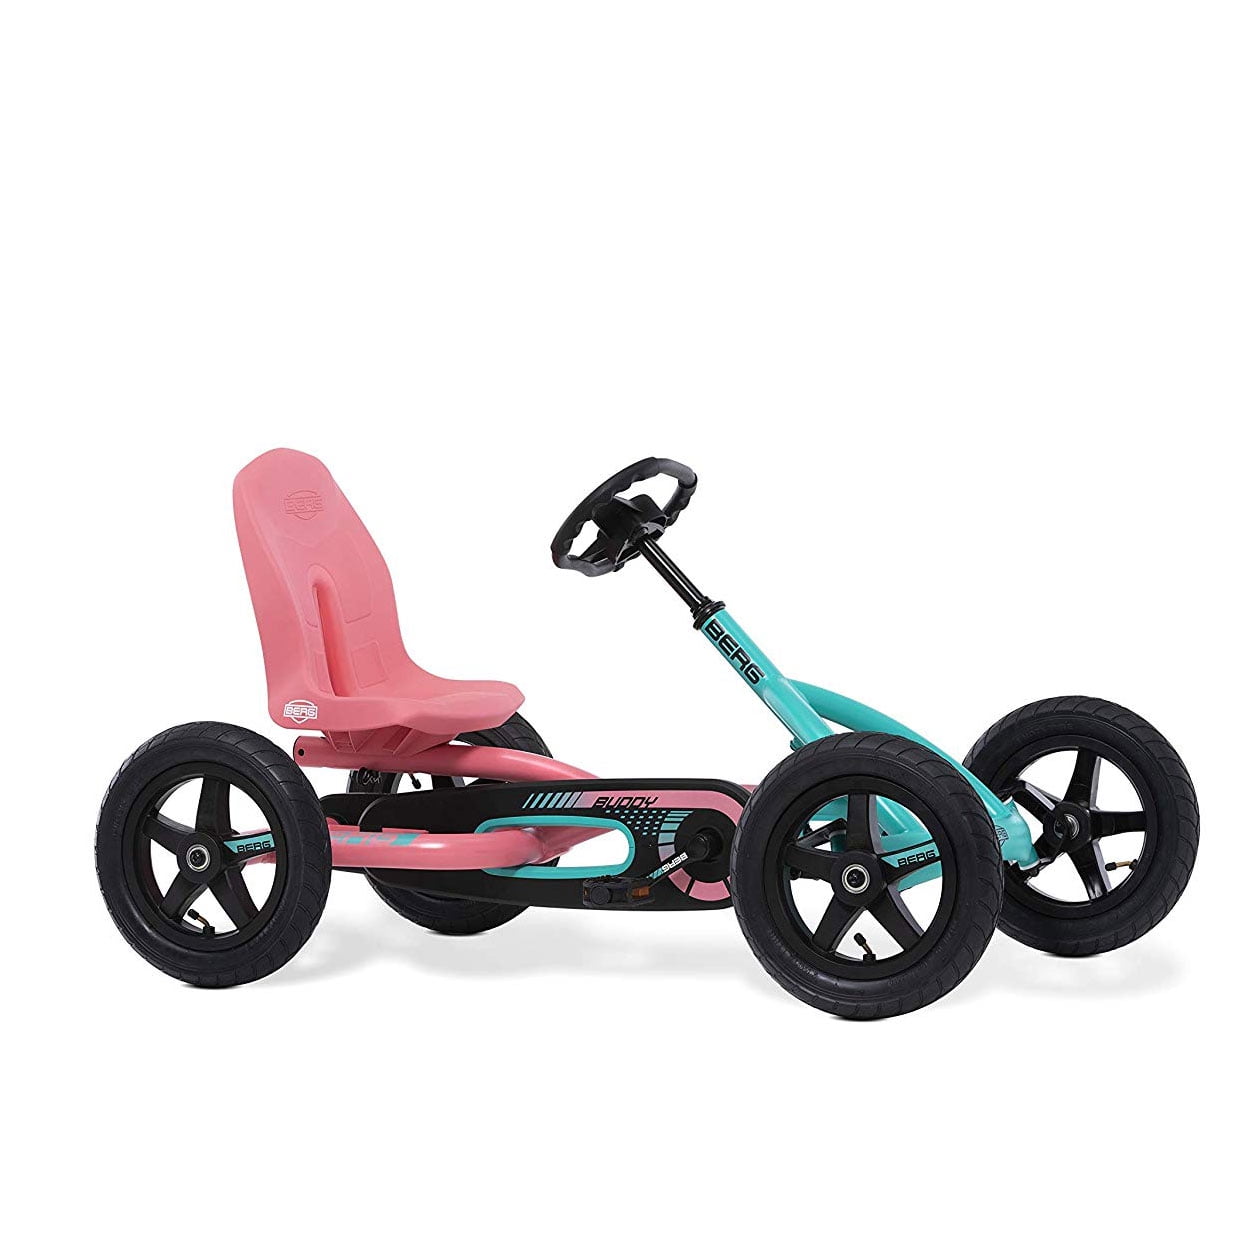 Berg Toys Buddy Lua Pedal Powered Kids Go Kart Toy, Pink and Mint 